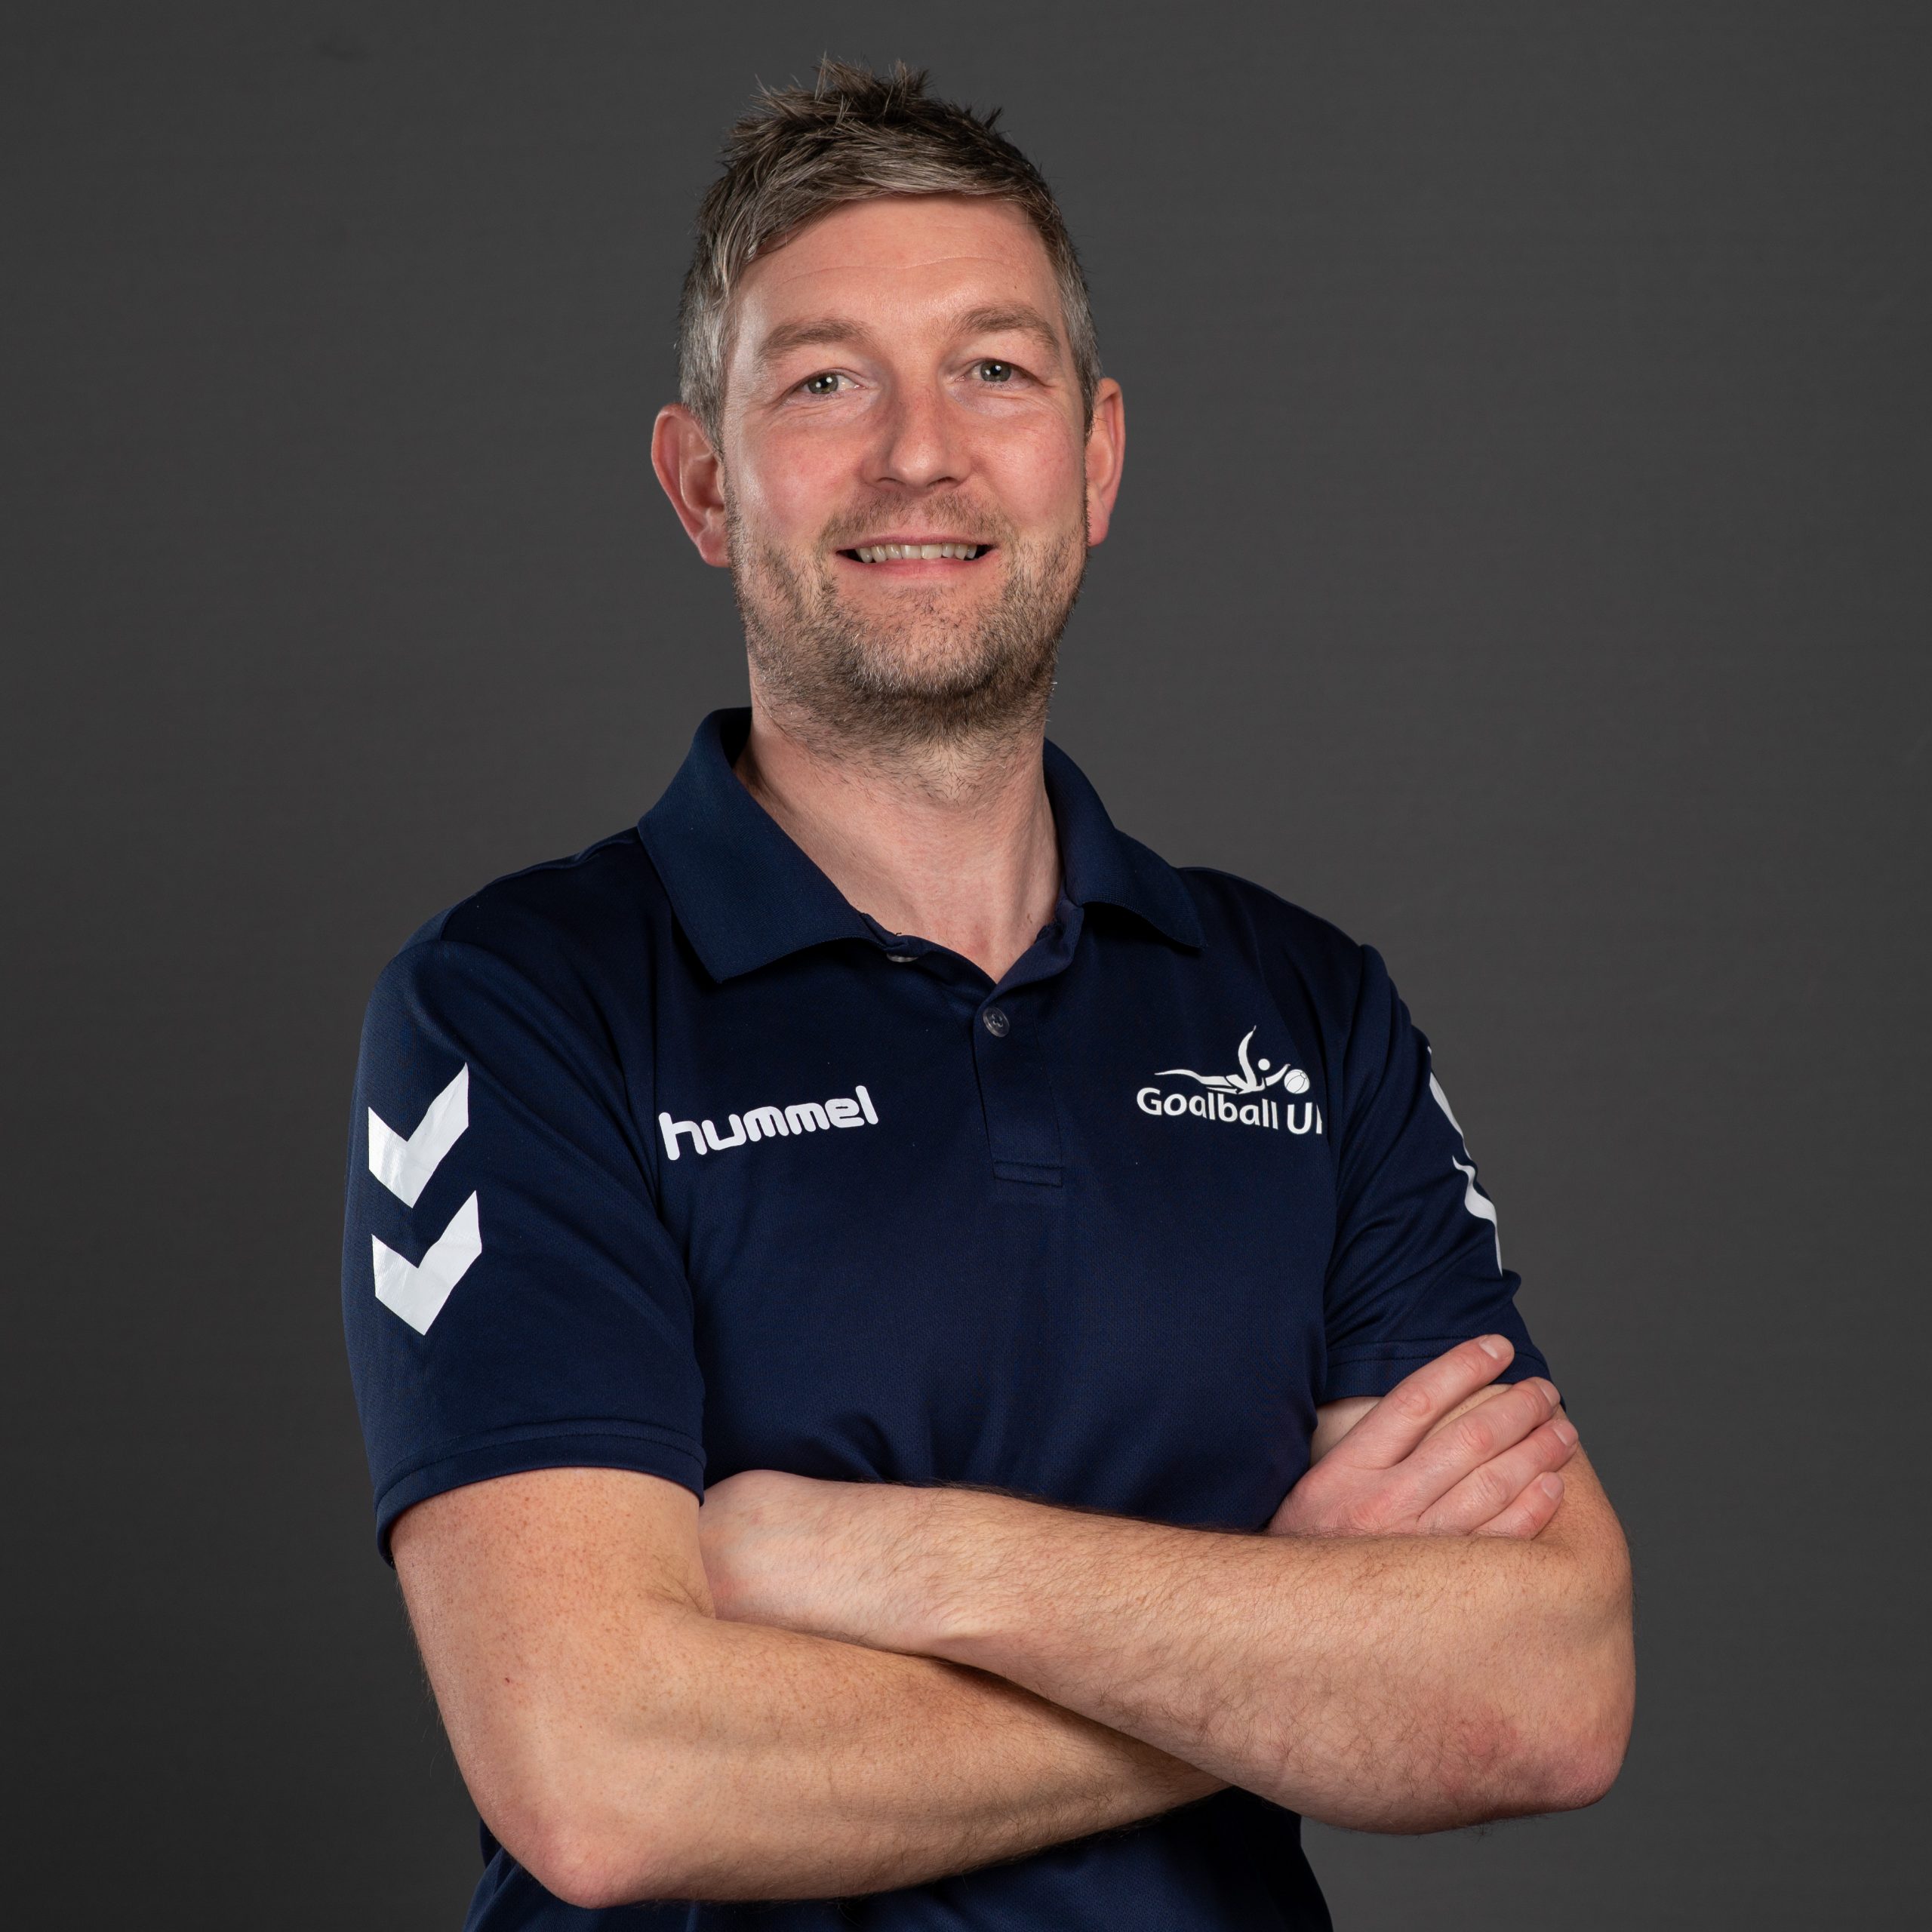 Gary Fraser headshot. Gary is wearing a dark blue Goalball UK t-shirt and is stood with arms folded against a dark grey background.